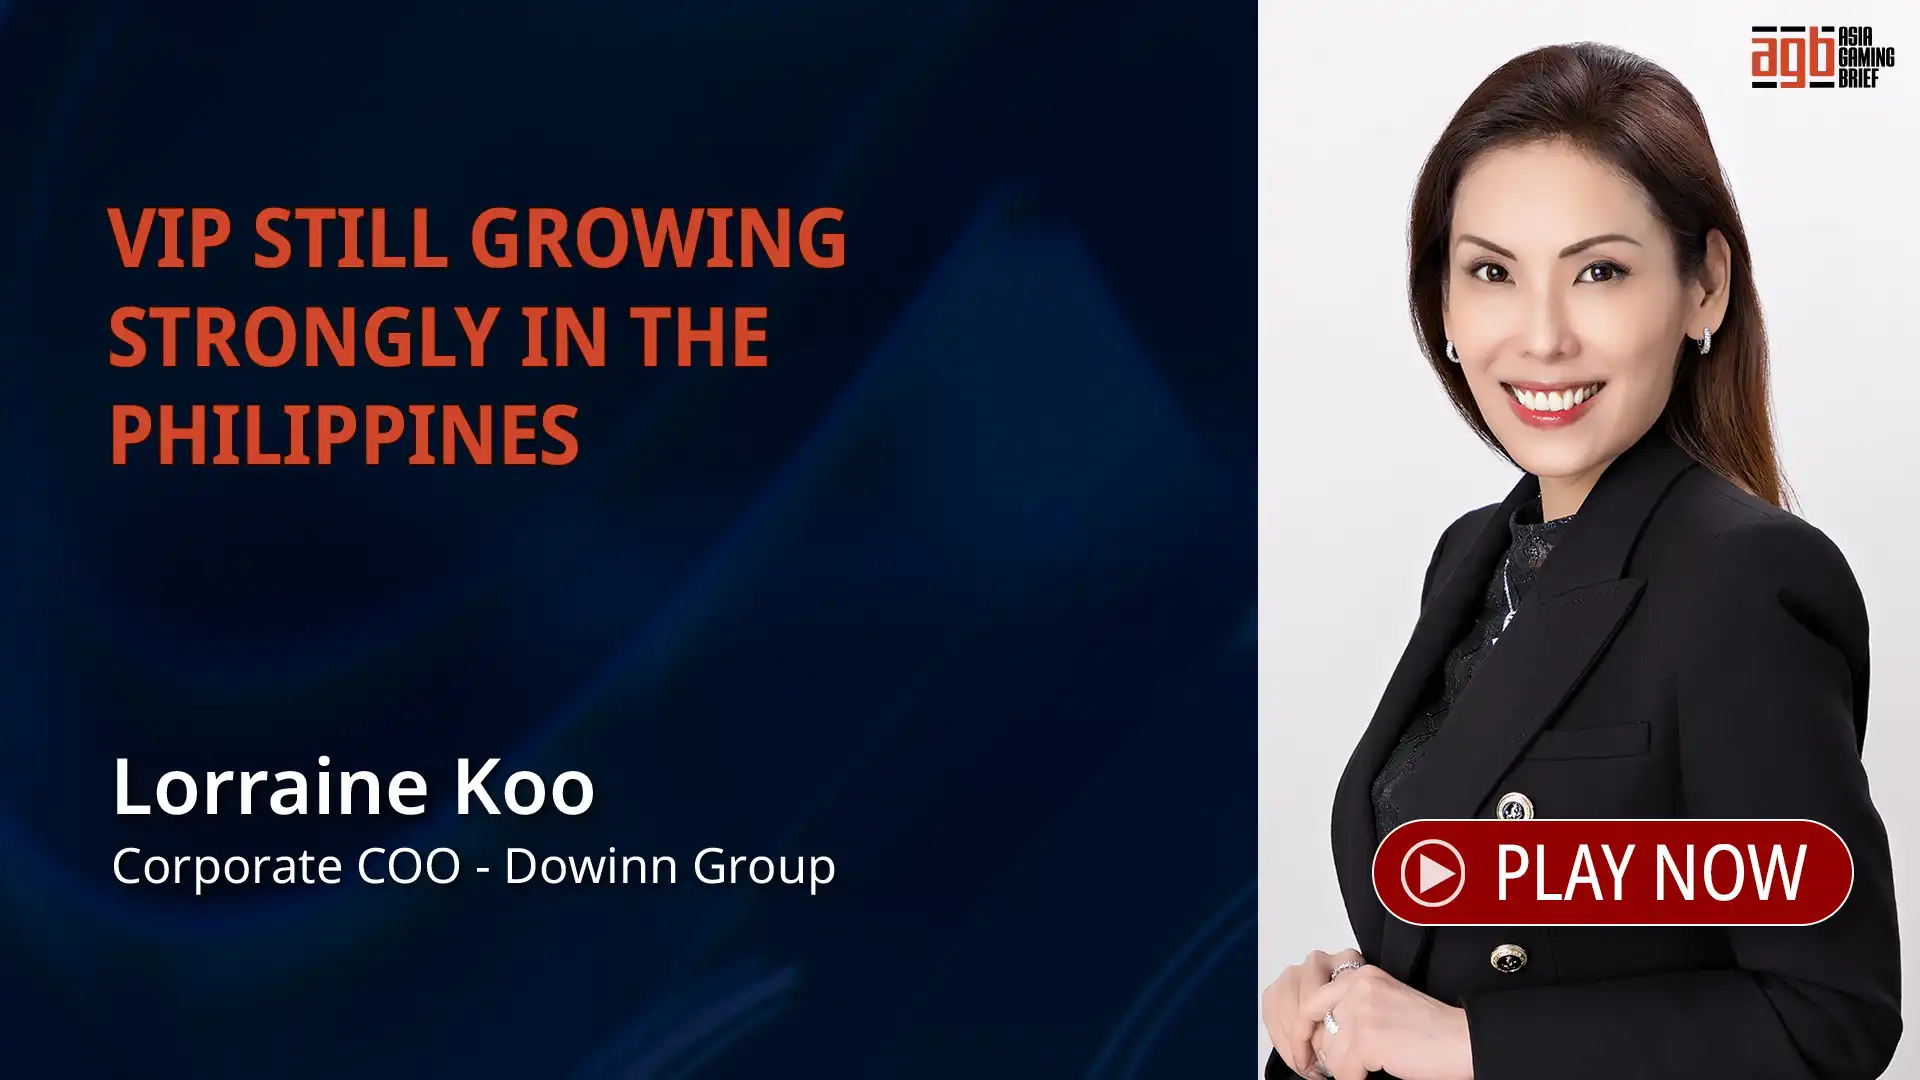 VIP still growing strongly in the Philippines: Lorraine Koo, Dowinn Group